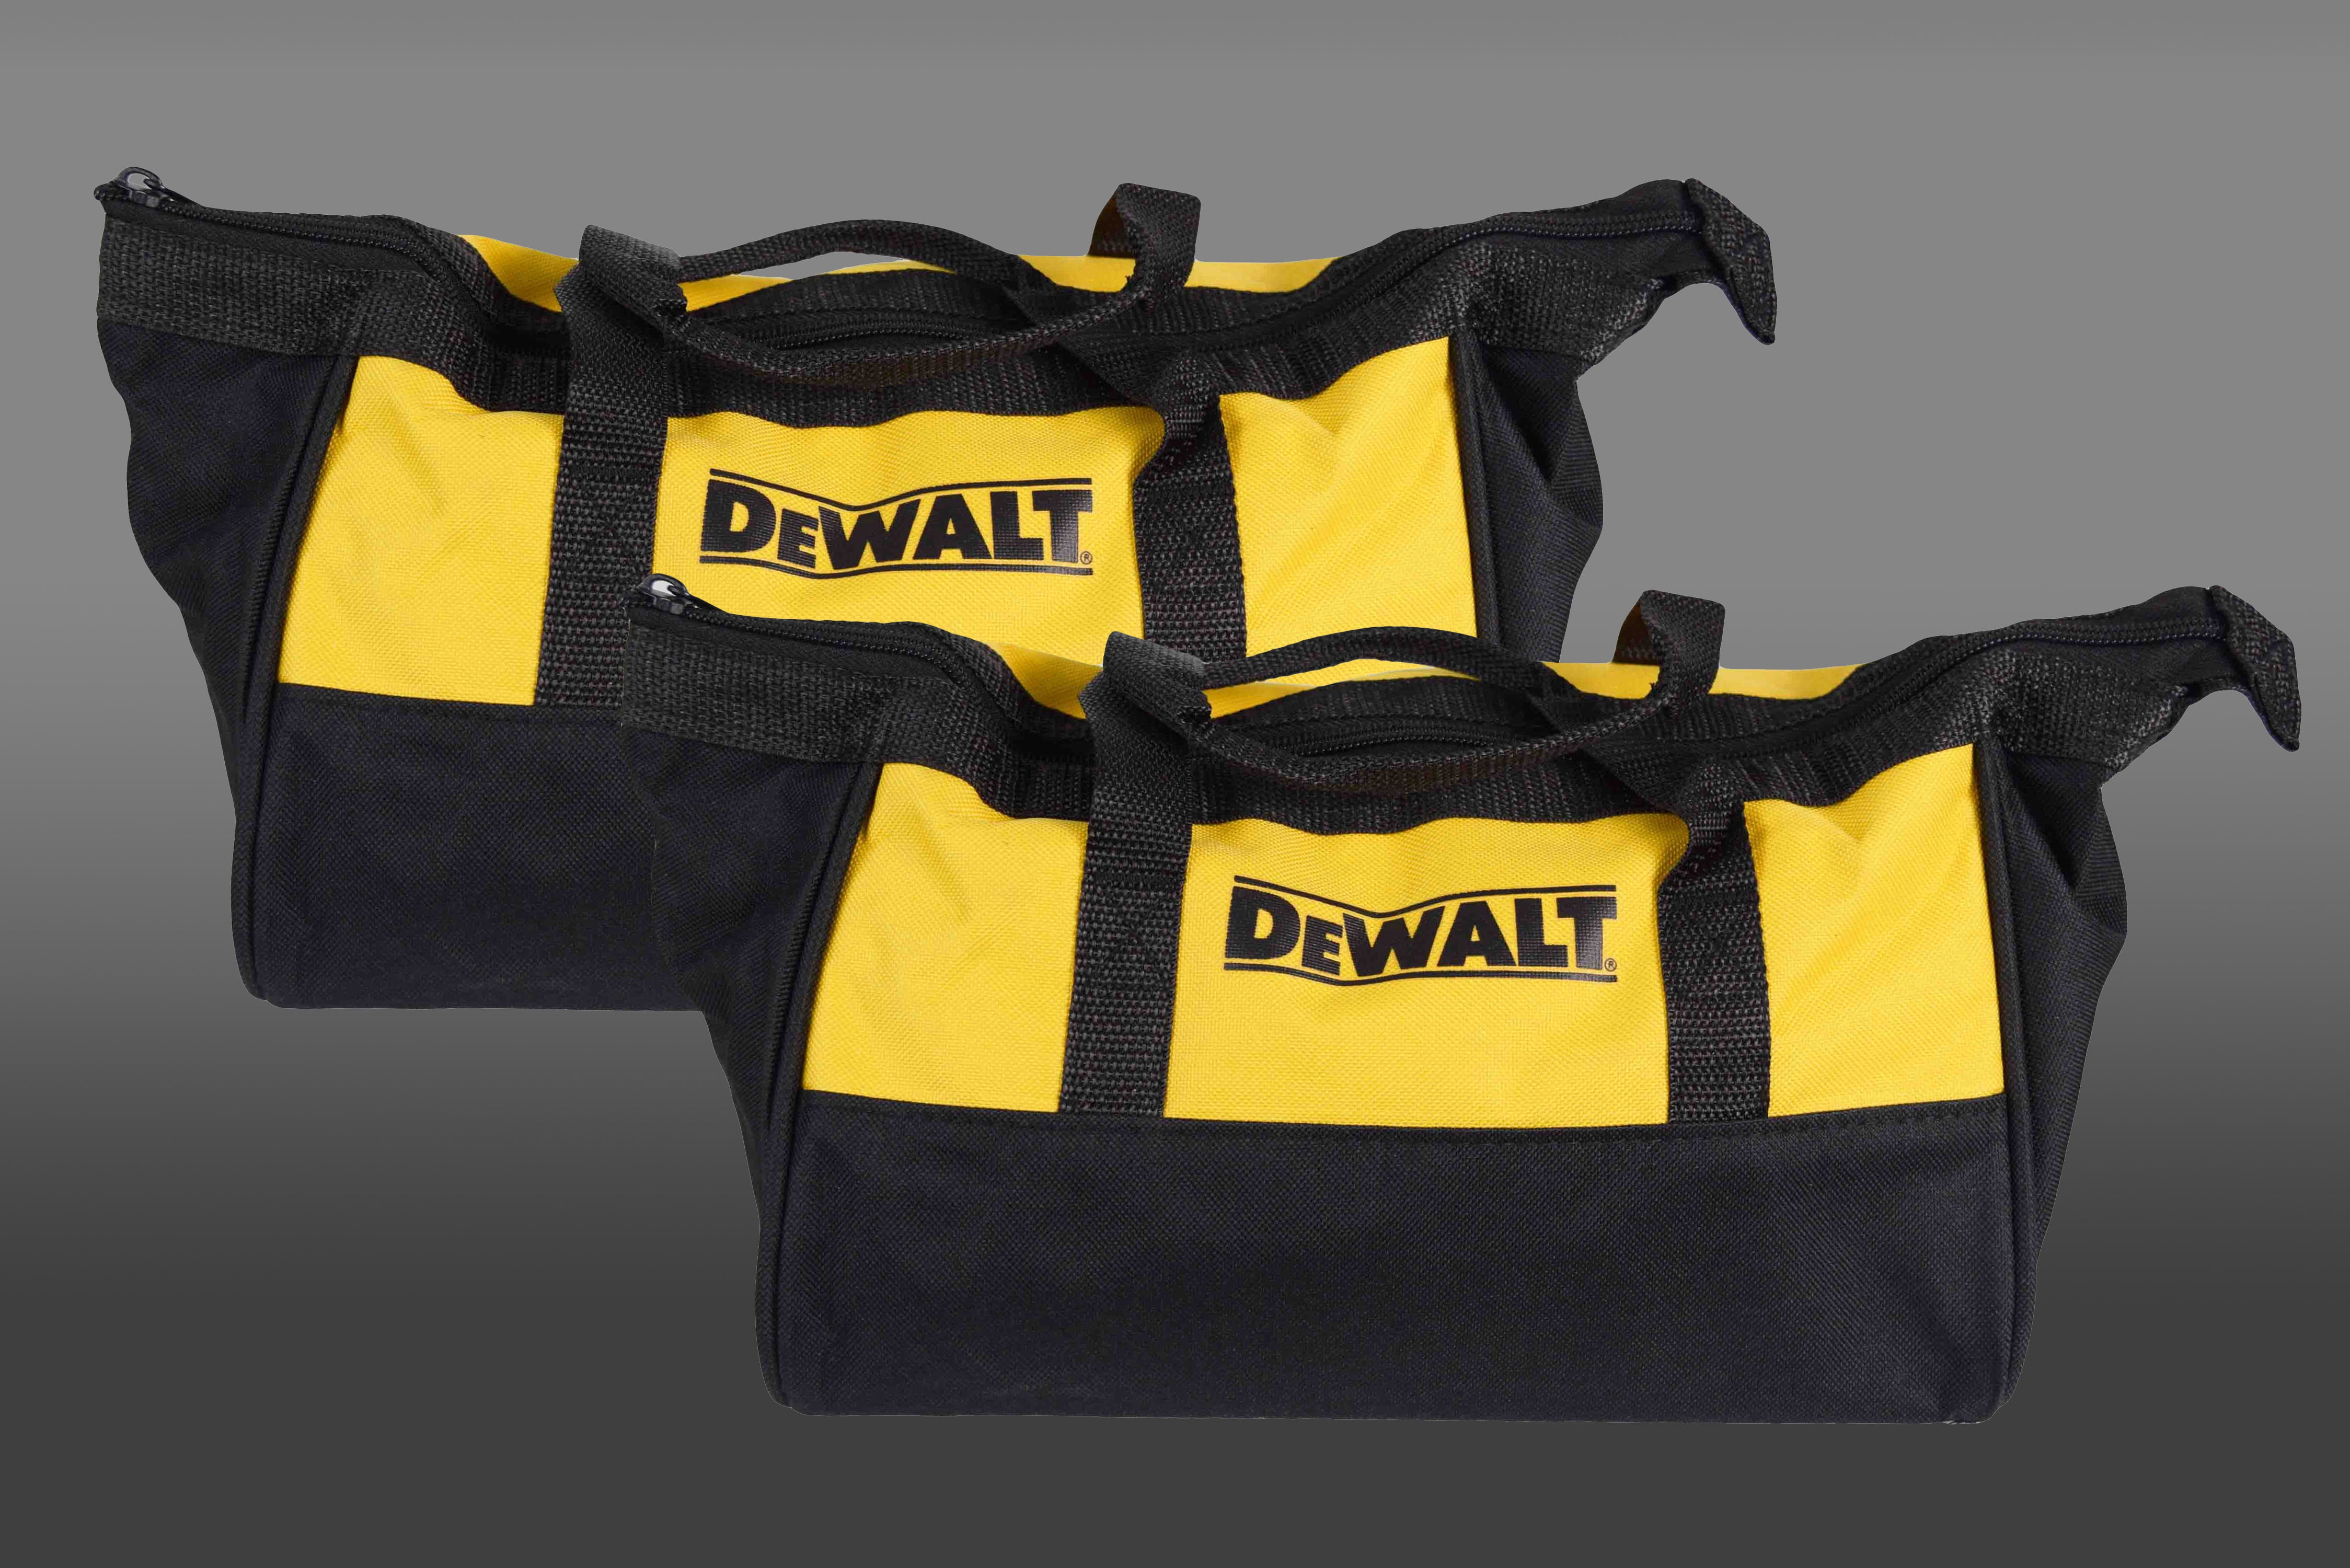 Dewalt Heavy Duty Tool Bag for power tools 18inch Bag yellow and black 4 Pack 